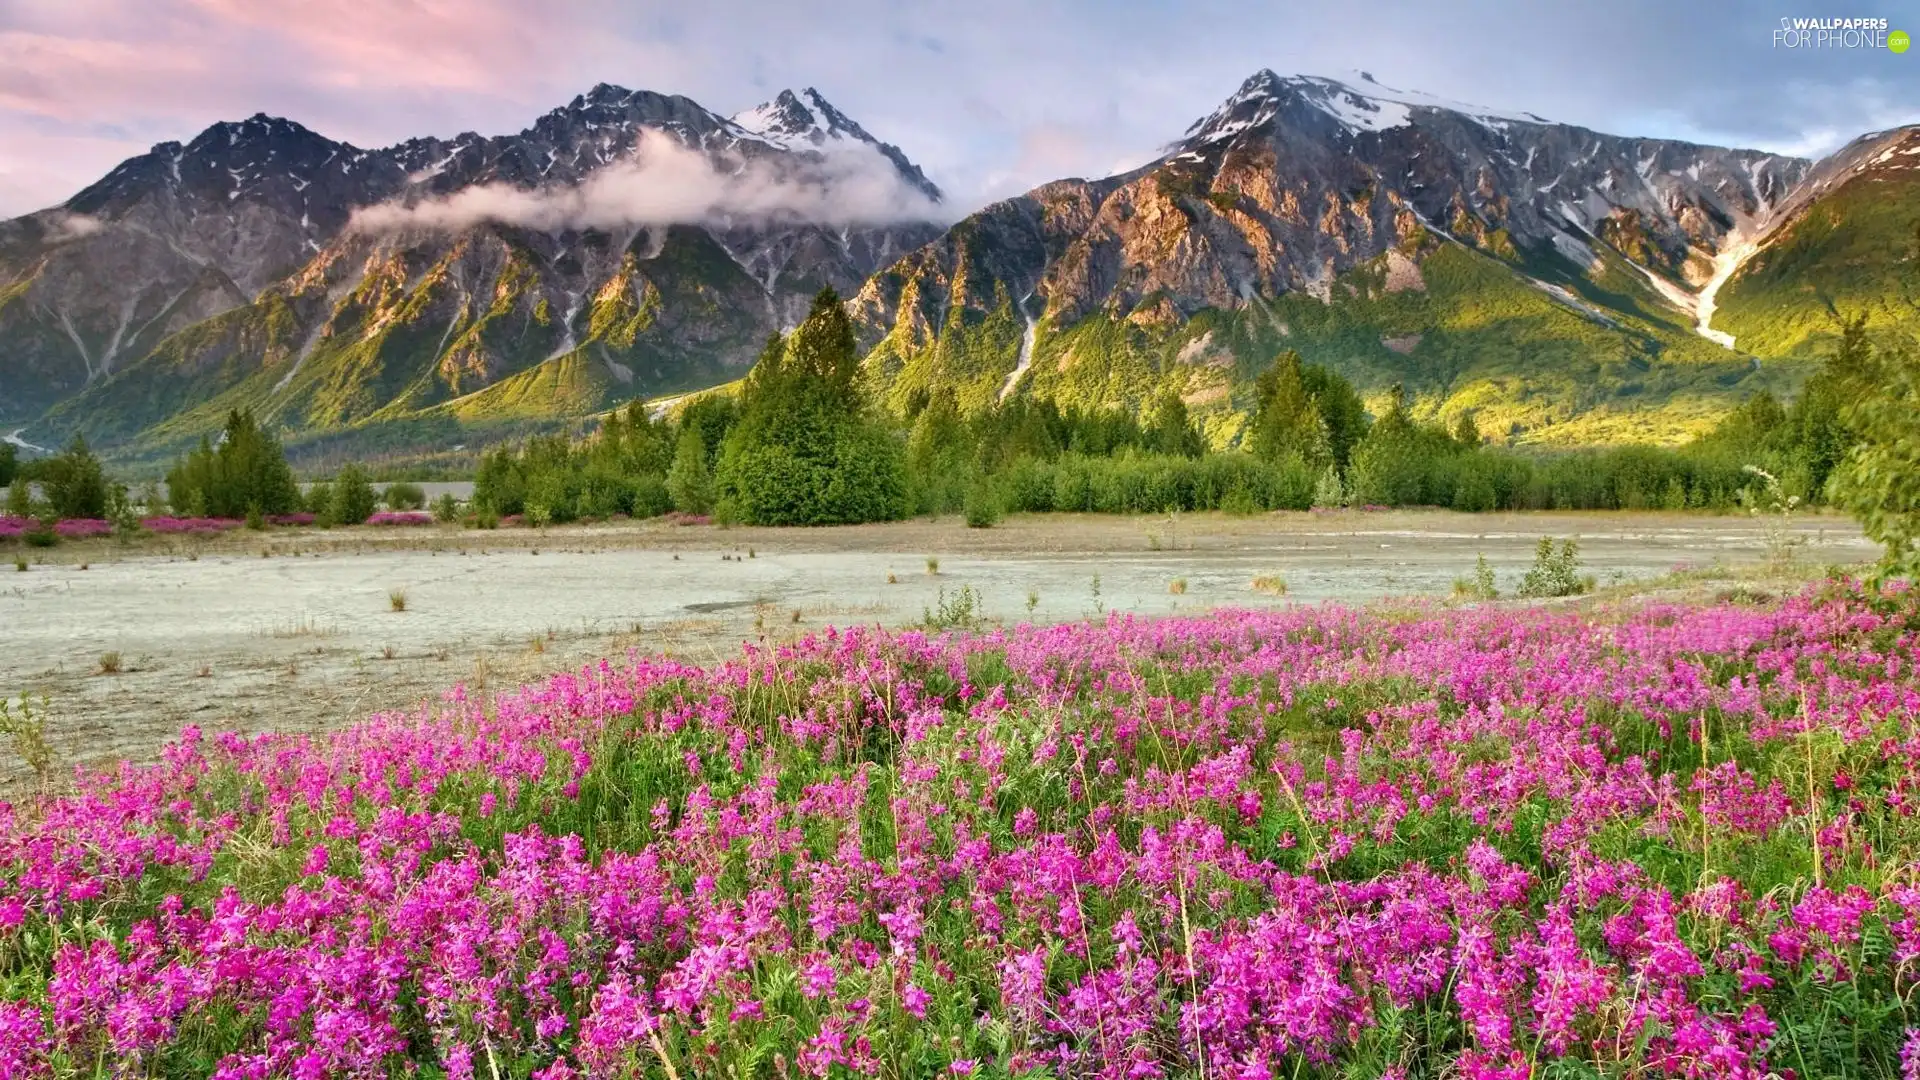 viewes, Flowers, clouds, trees, Mountains